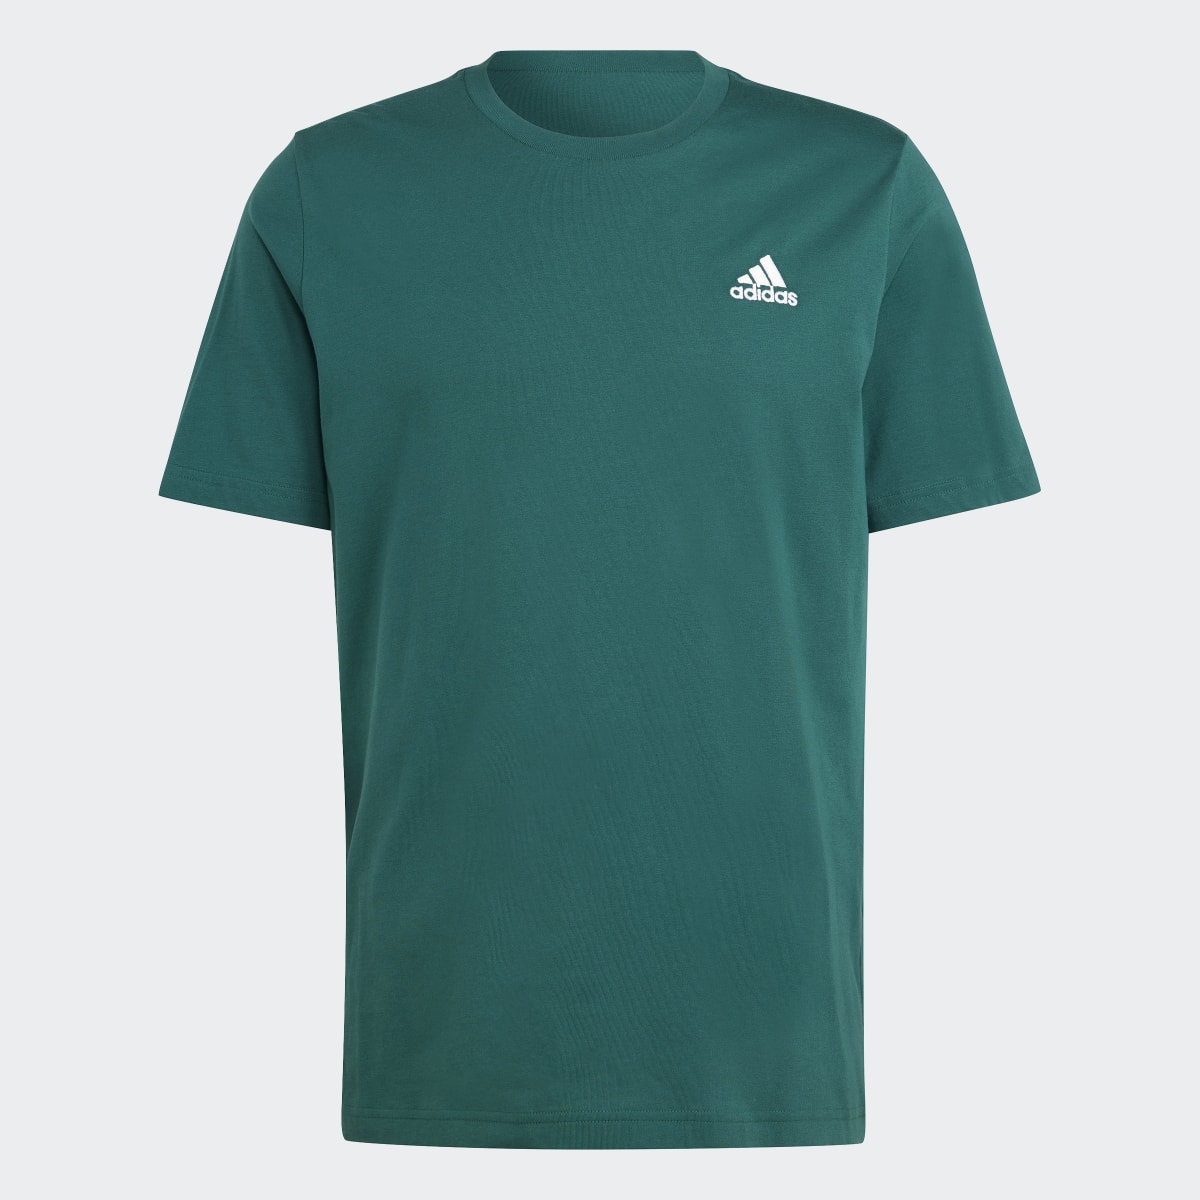 Adidas Essentials Single Jersey Embroidered Small Logo Tee. 5